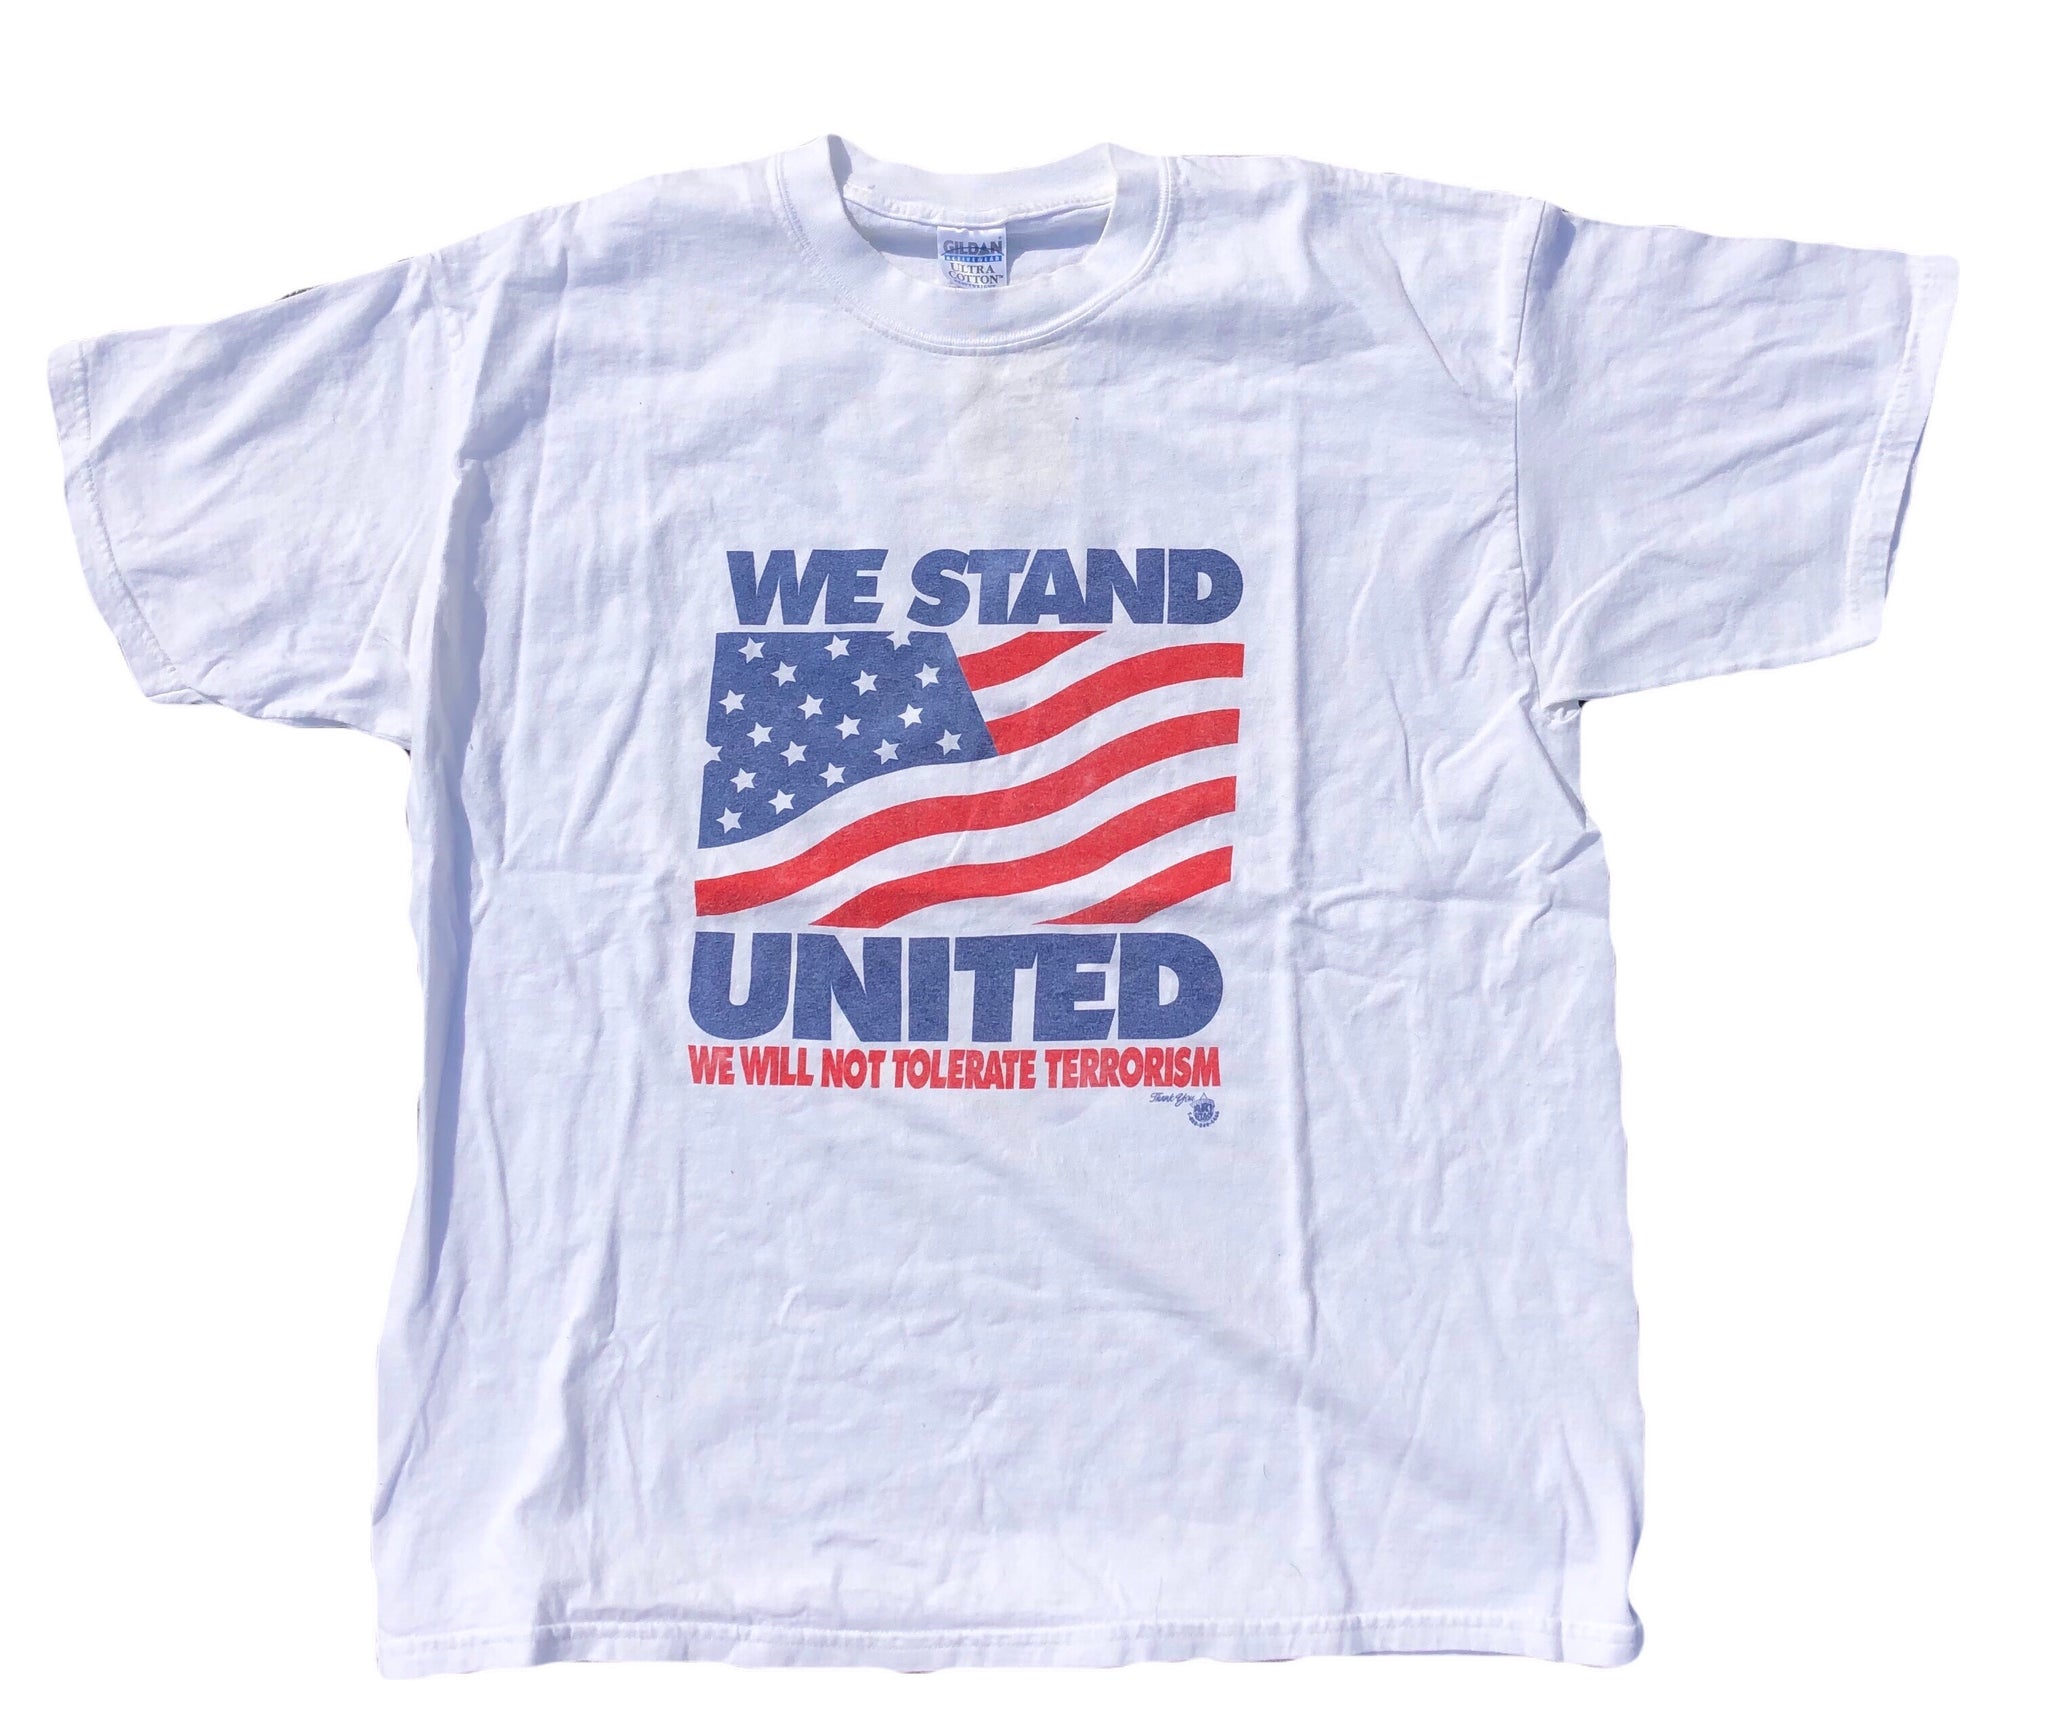 2001 We Stand United Shirt White Size X-Large - Beyond 94